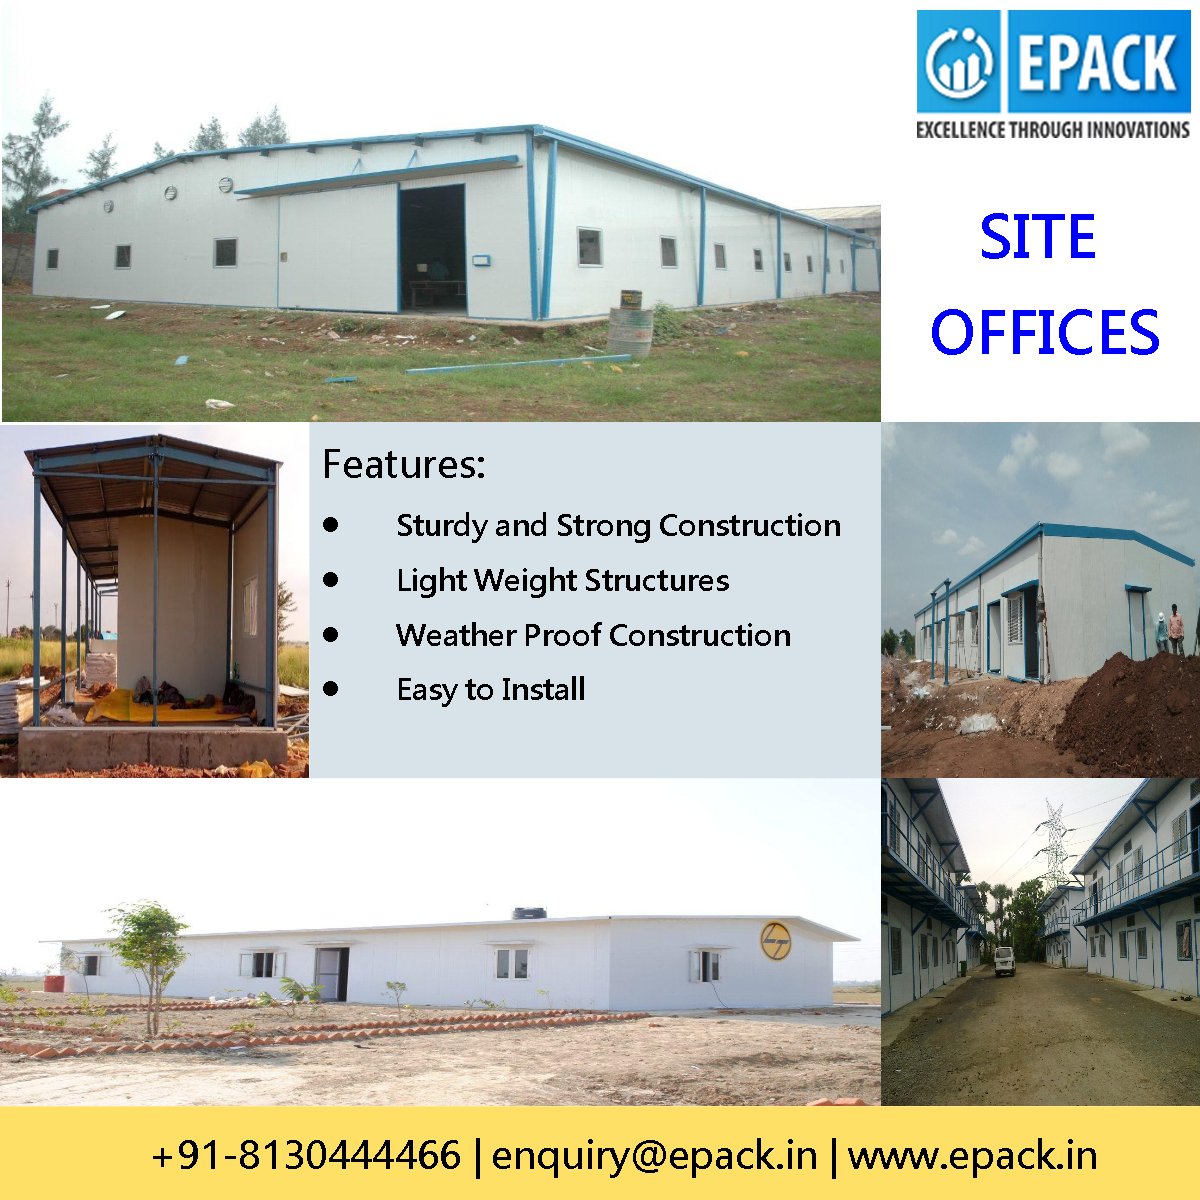 #EPACK #siteoffices are easy to install, weather proof, sturdy and have strong construction. #PrefabSiteOffices can be erected at nominal cost, which makes it one of the most preferred ones in the Indian Market.
Visit us at epack.in/site-office/ 
#leadingmanufacturer